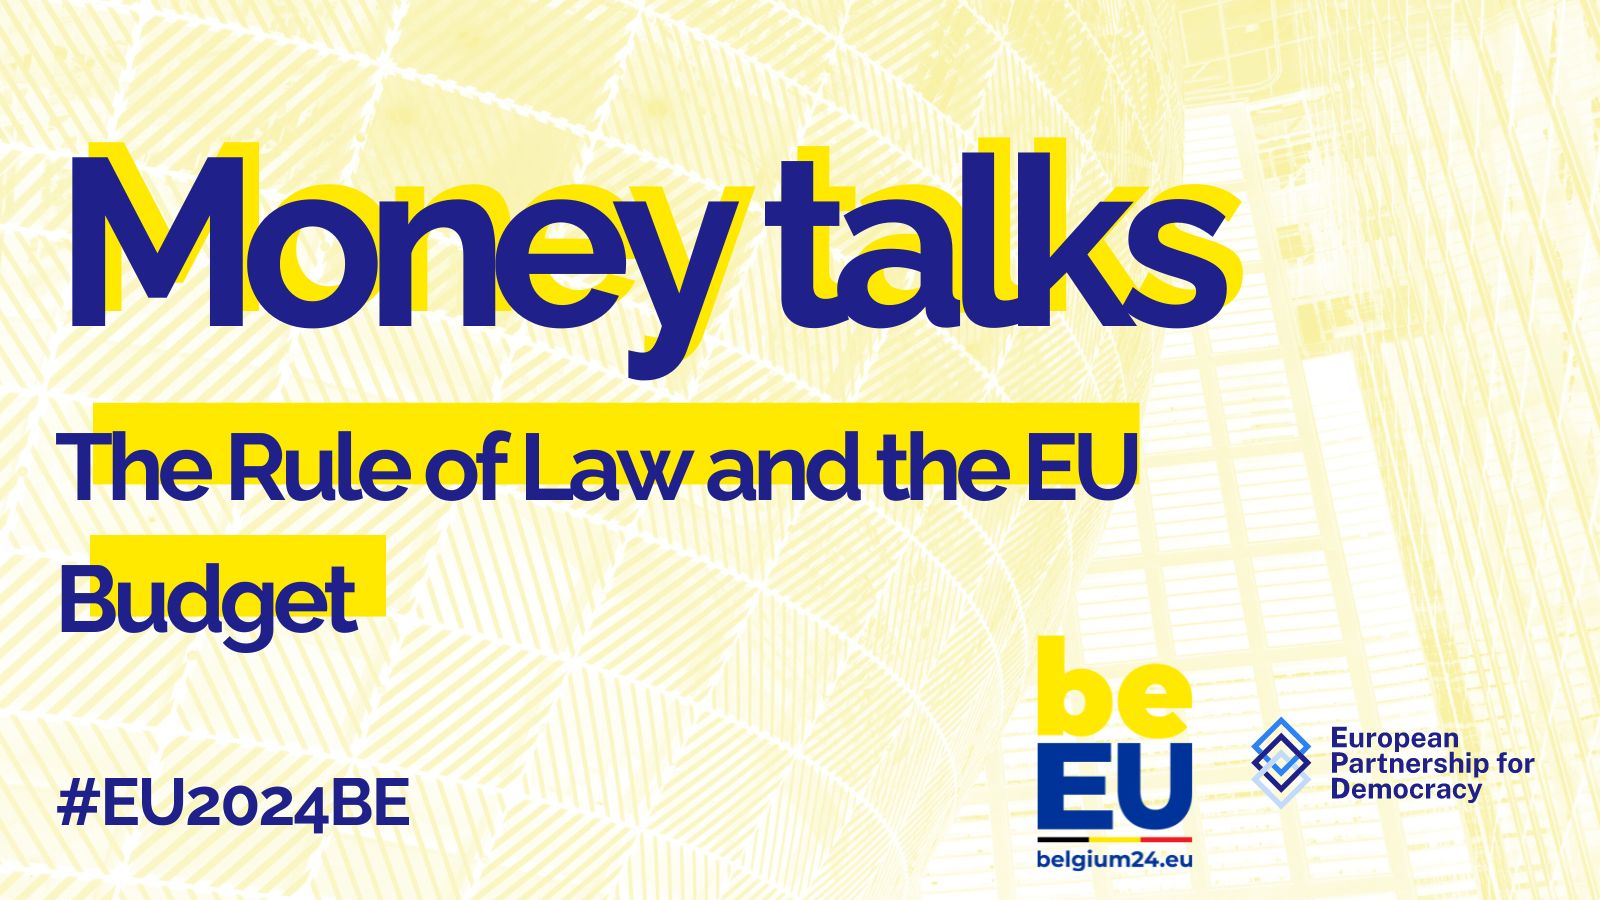 Money talks: The Rule of Law and the EU Budget. #EU2024BE 